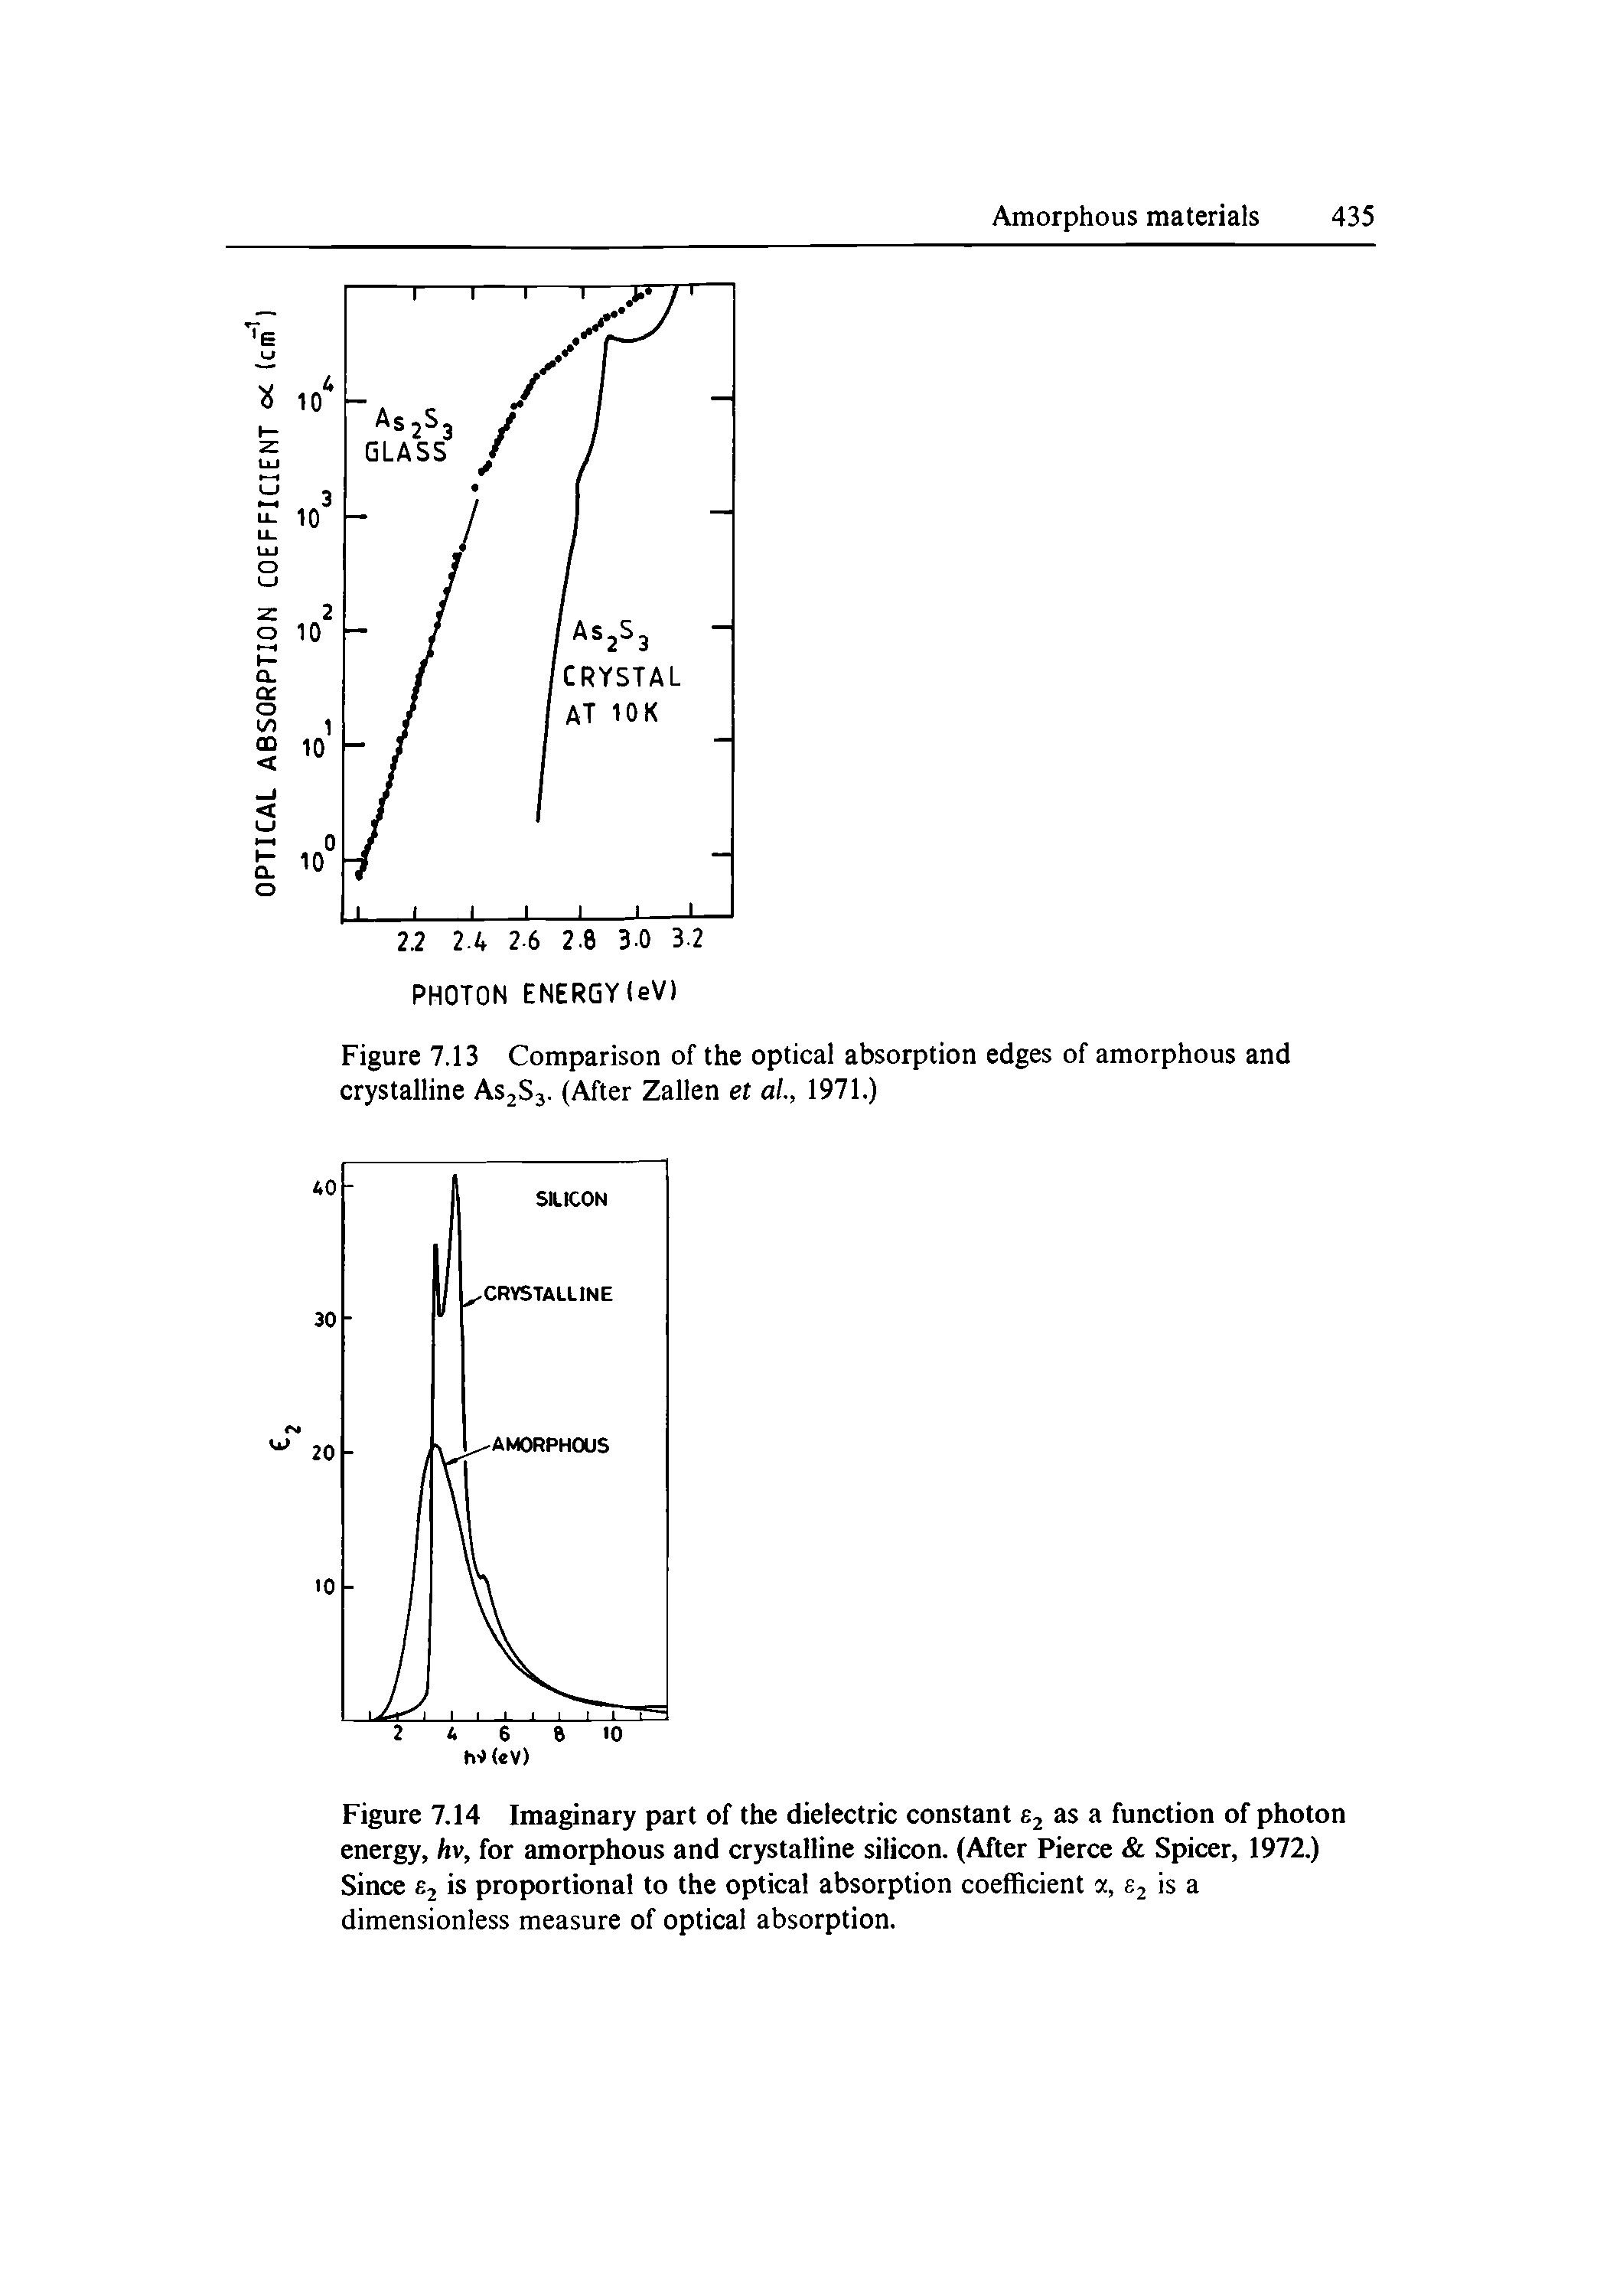 Figure 7.14 Imaginary part of the dielectric constant 62 as a function of photon energy, hv, for amorphous and crystalline silicon. (After Pierce Spicer, 1972.) Since Sj is proportional to the optical absorption coefficient a, Sj is a dimensionless measure of optical absorption.